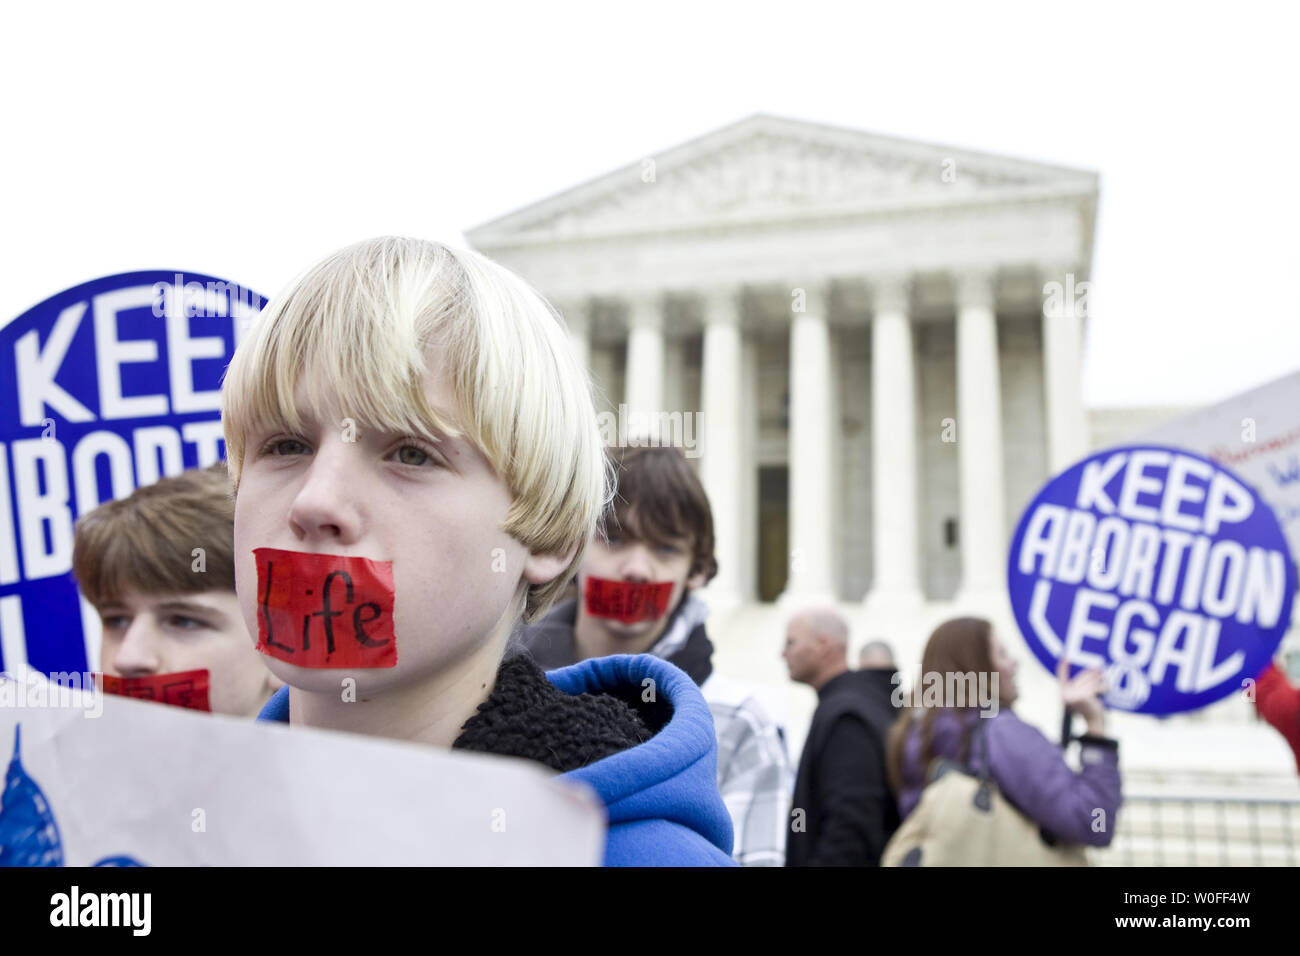 Pro-Life and Pro-Choice protesters demonstrate in front of the U.S. Supreme Court on the 37th Anniversary of the Roe v Wade Supreme Court ruling on Capitol Hill in Washington on January 22, 2010.      UPI/Madeline Marshall Stock Photo